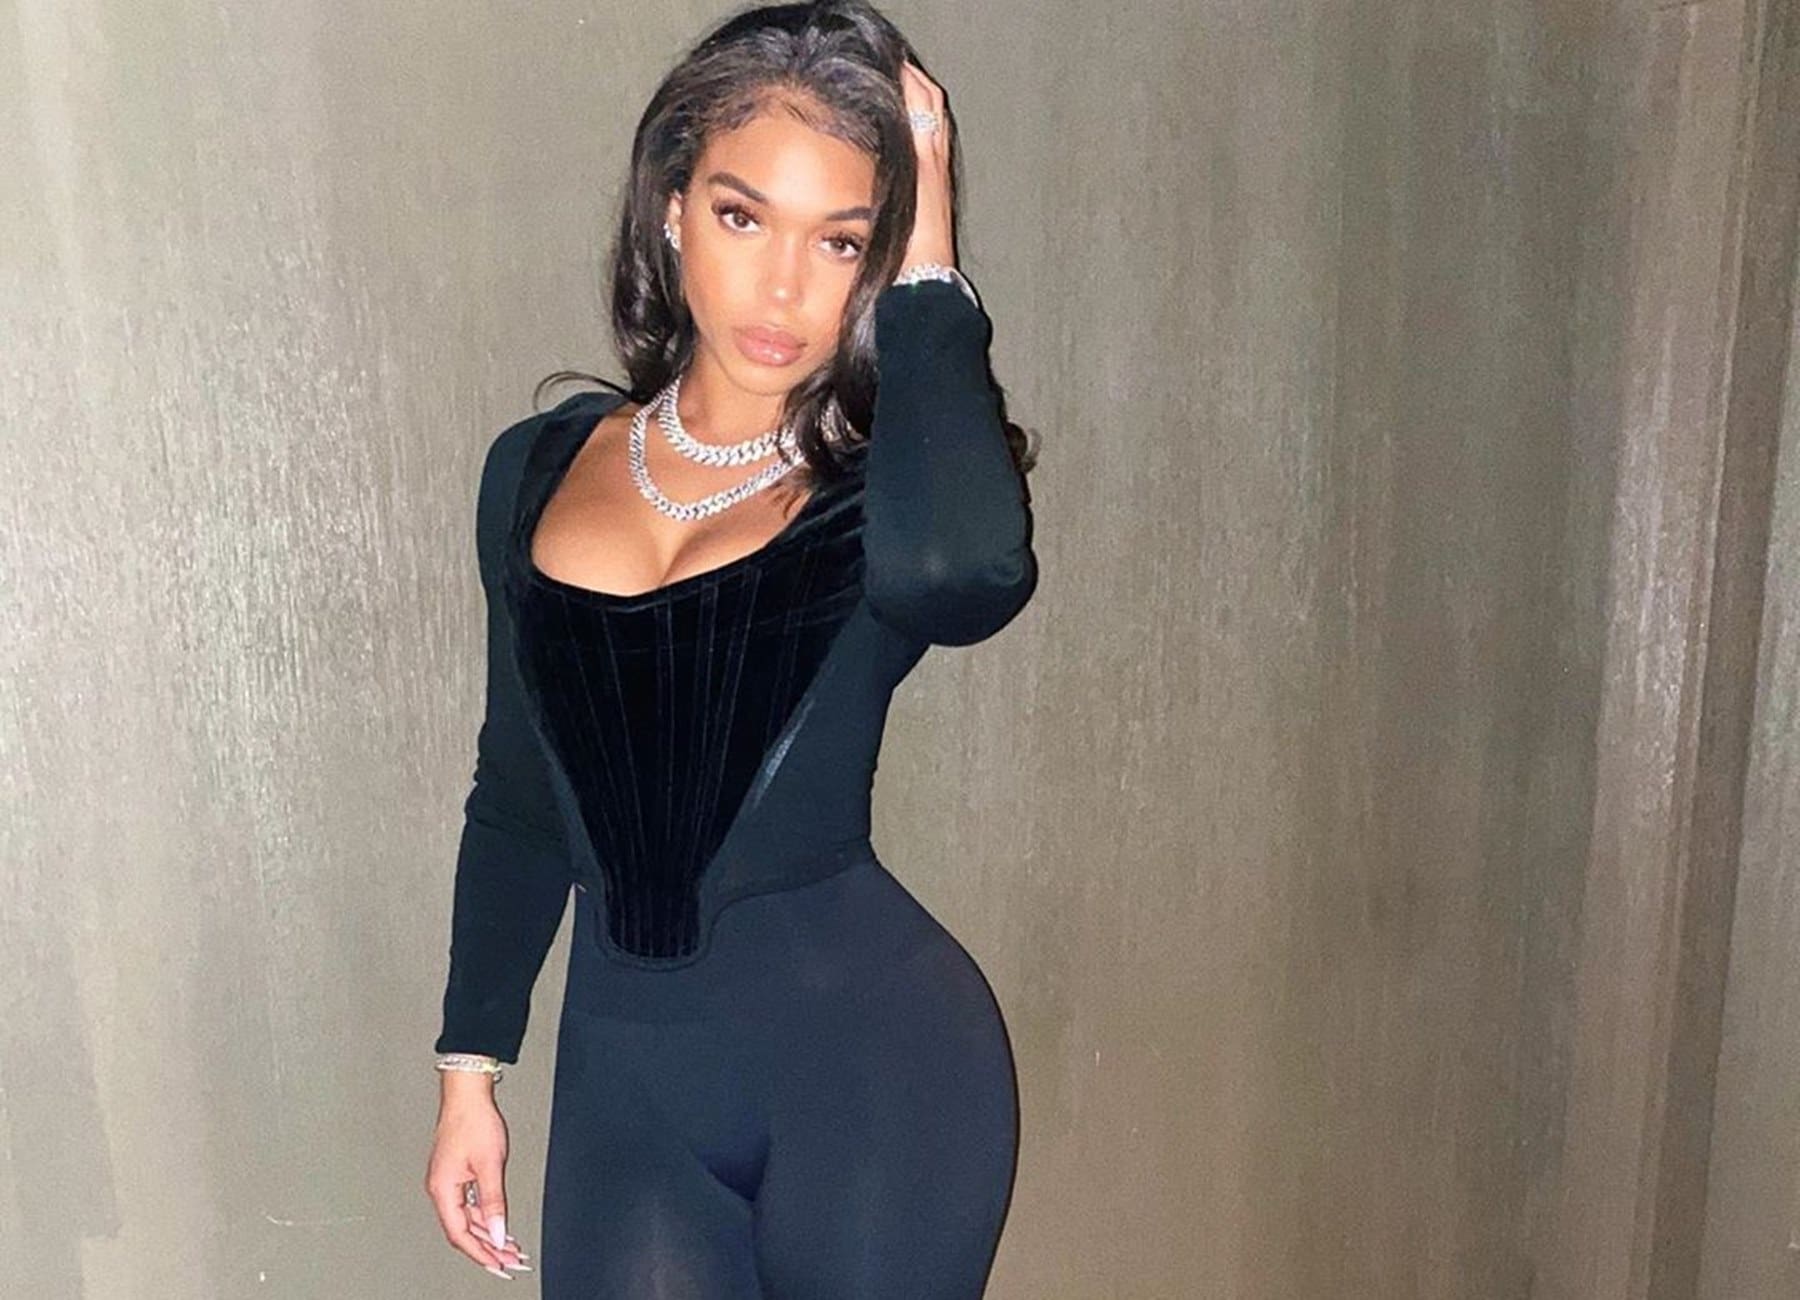 ”futures-girlfriend-lori-harvey-reveals-how-lucky-he-is-by-wearing-a-completely-sheer-dress-in-new-vacation-photos”